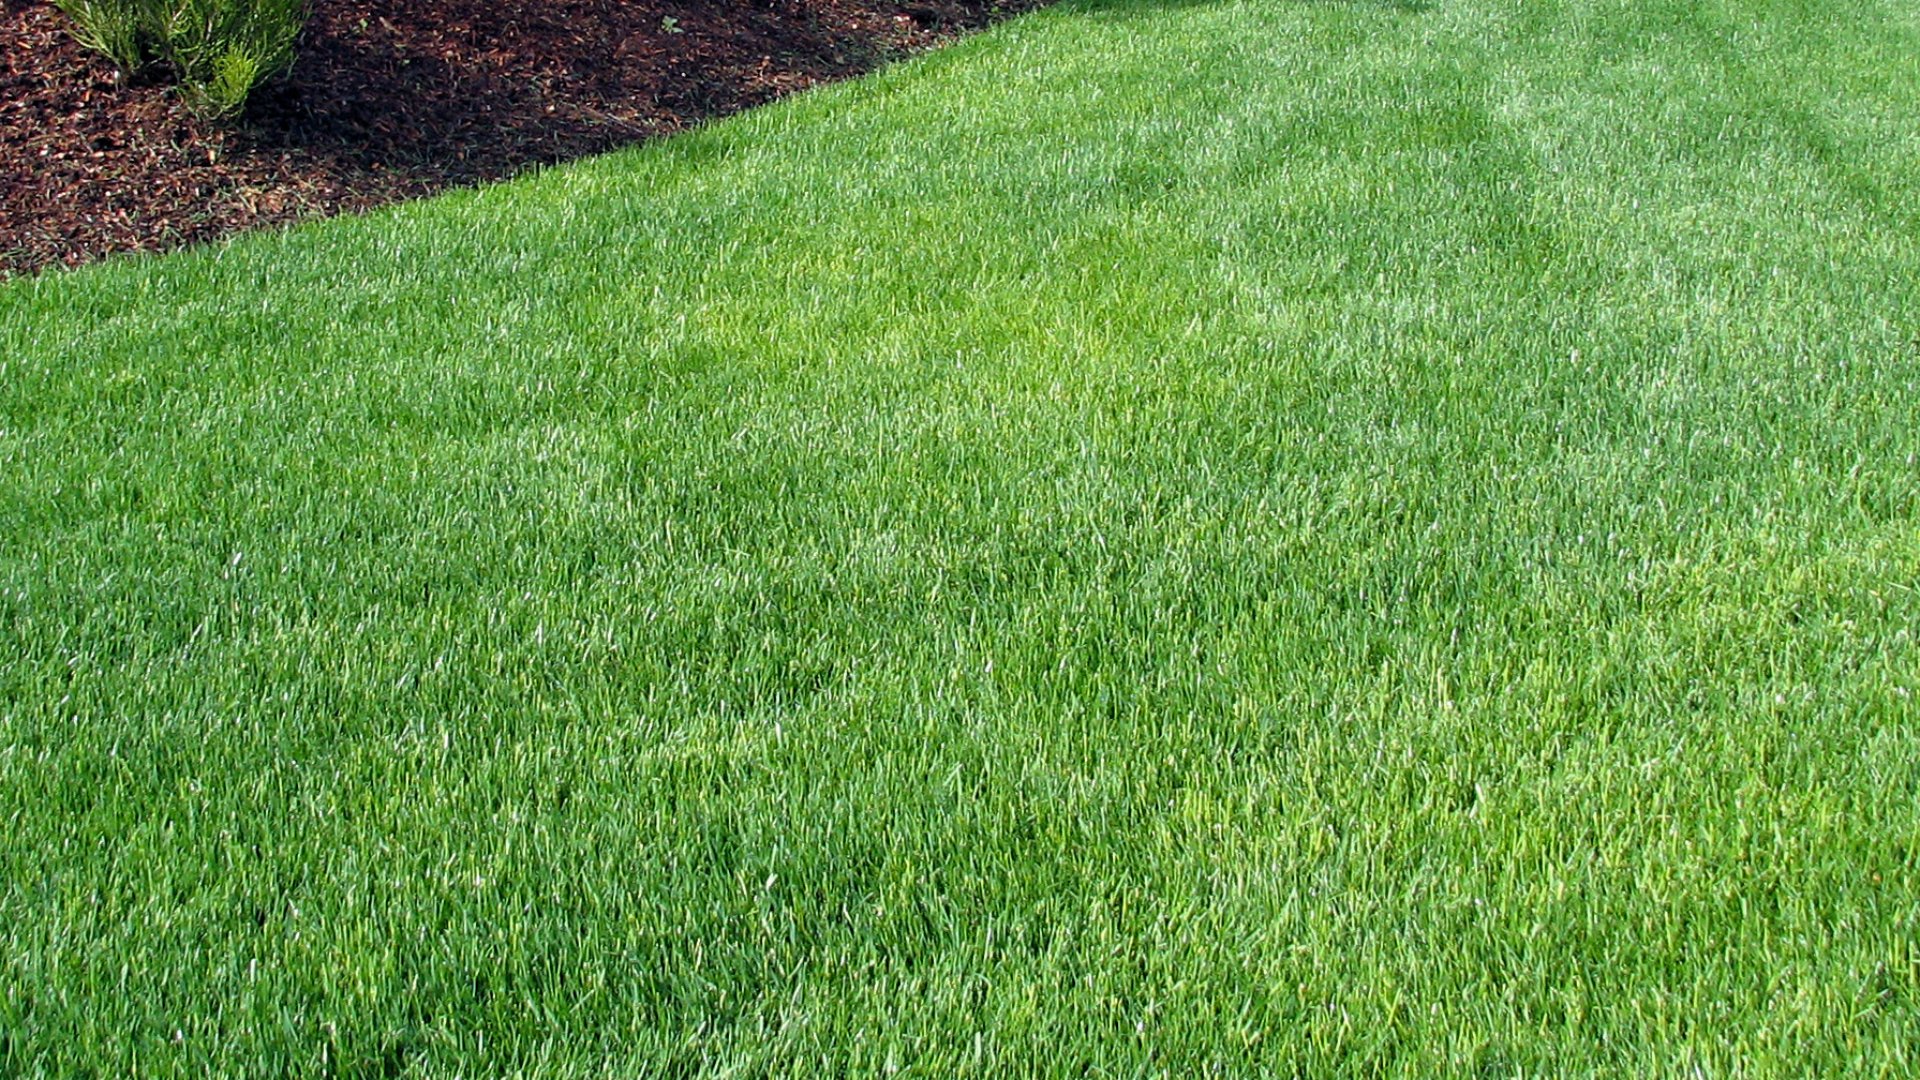 Aerating & Overseeding in the Fall Means a Healthier, Fuller Lawn in the Spring